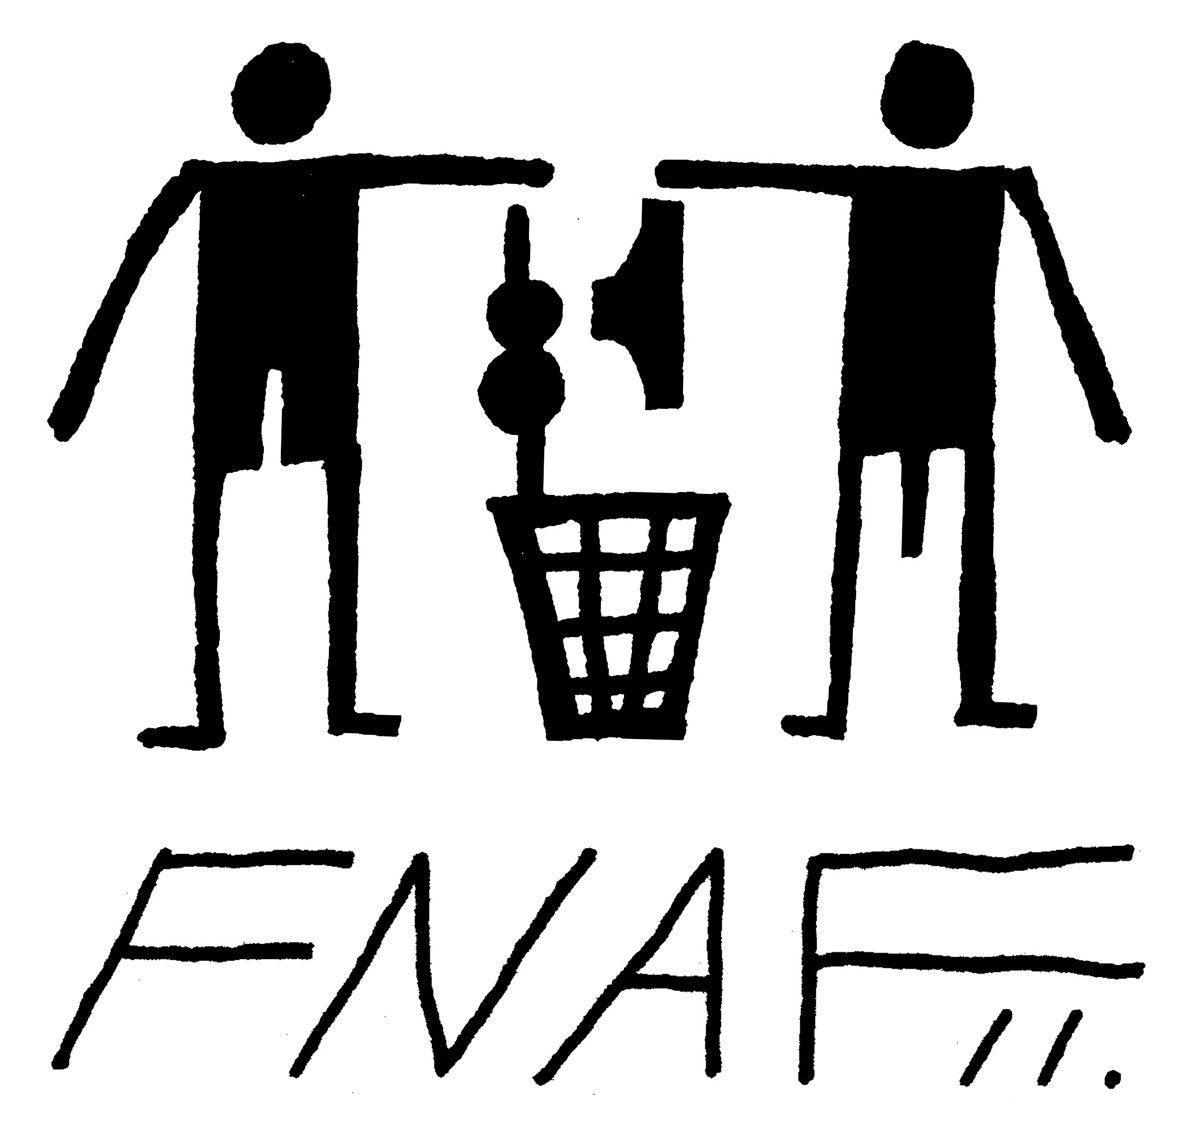 Second F.N.A.F. = Festival of Naked Forms - !extreme bareness!